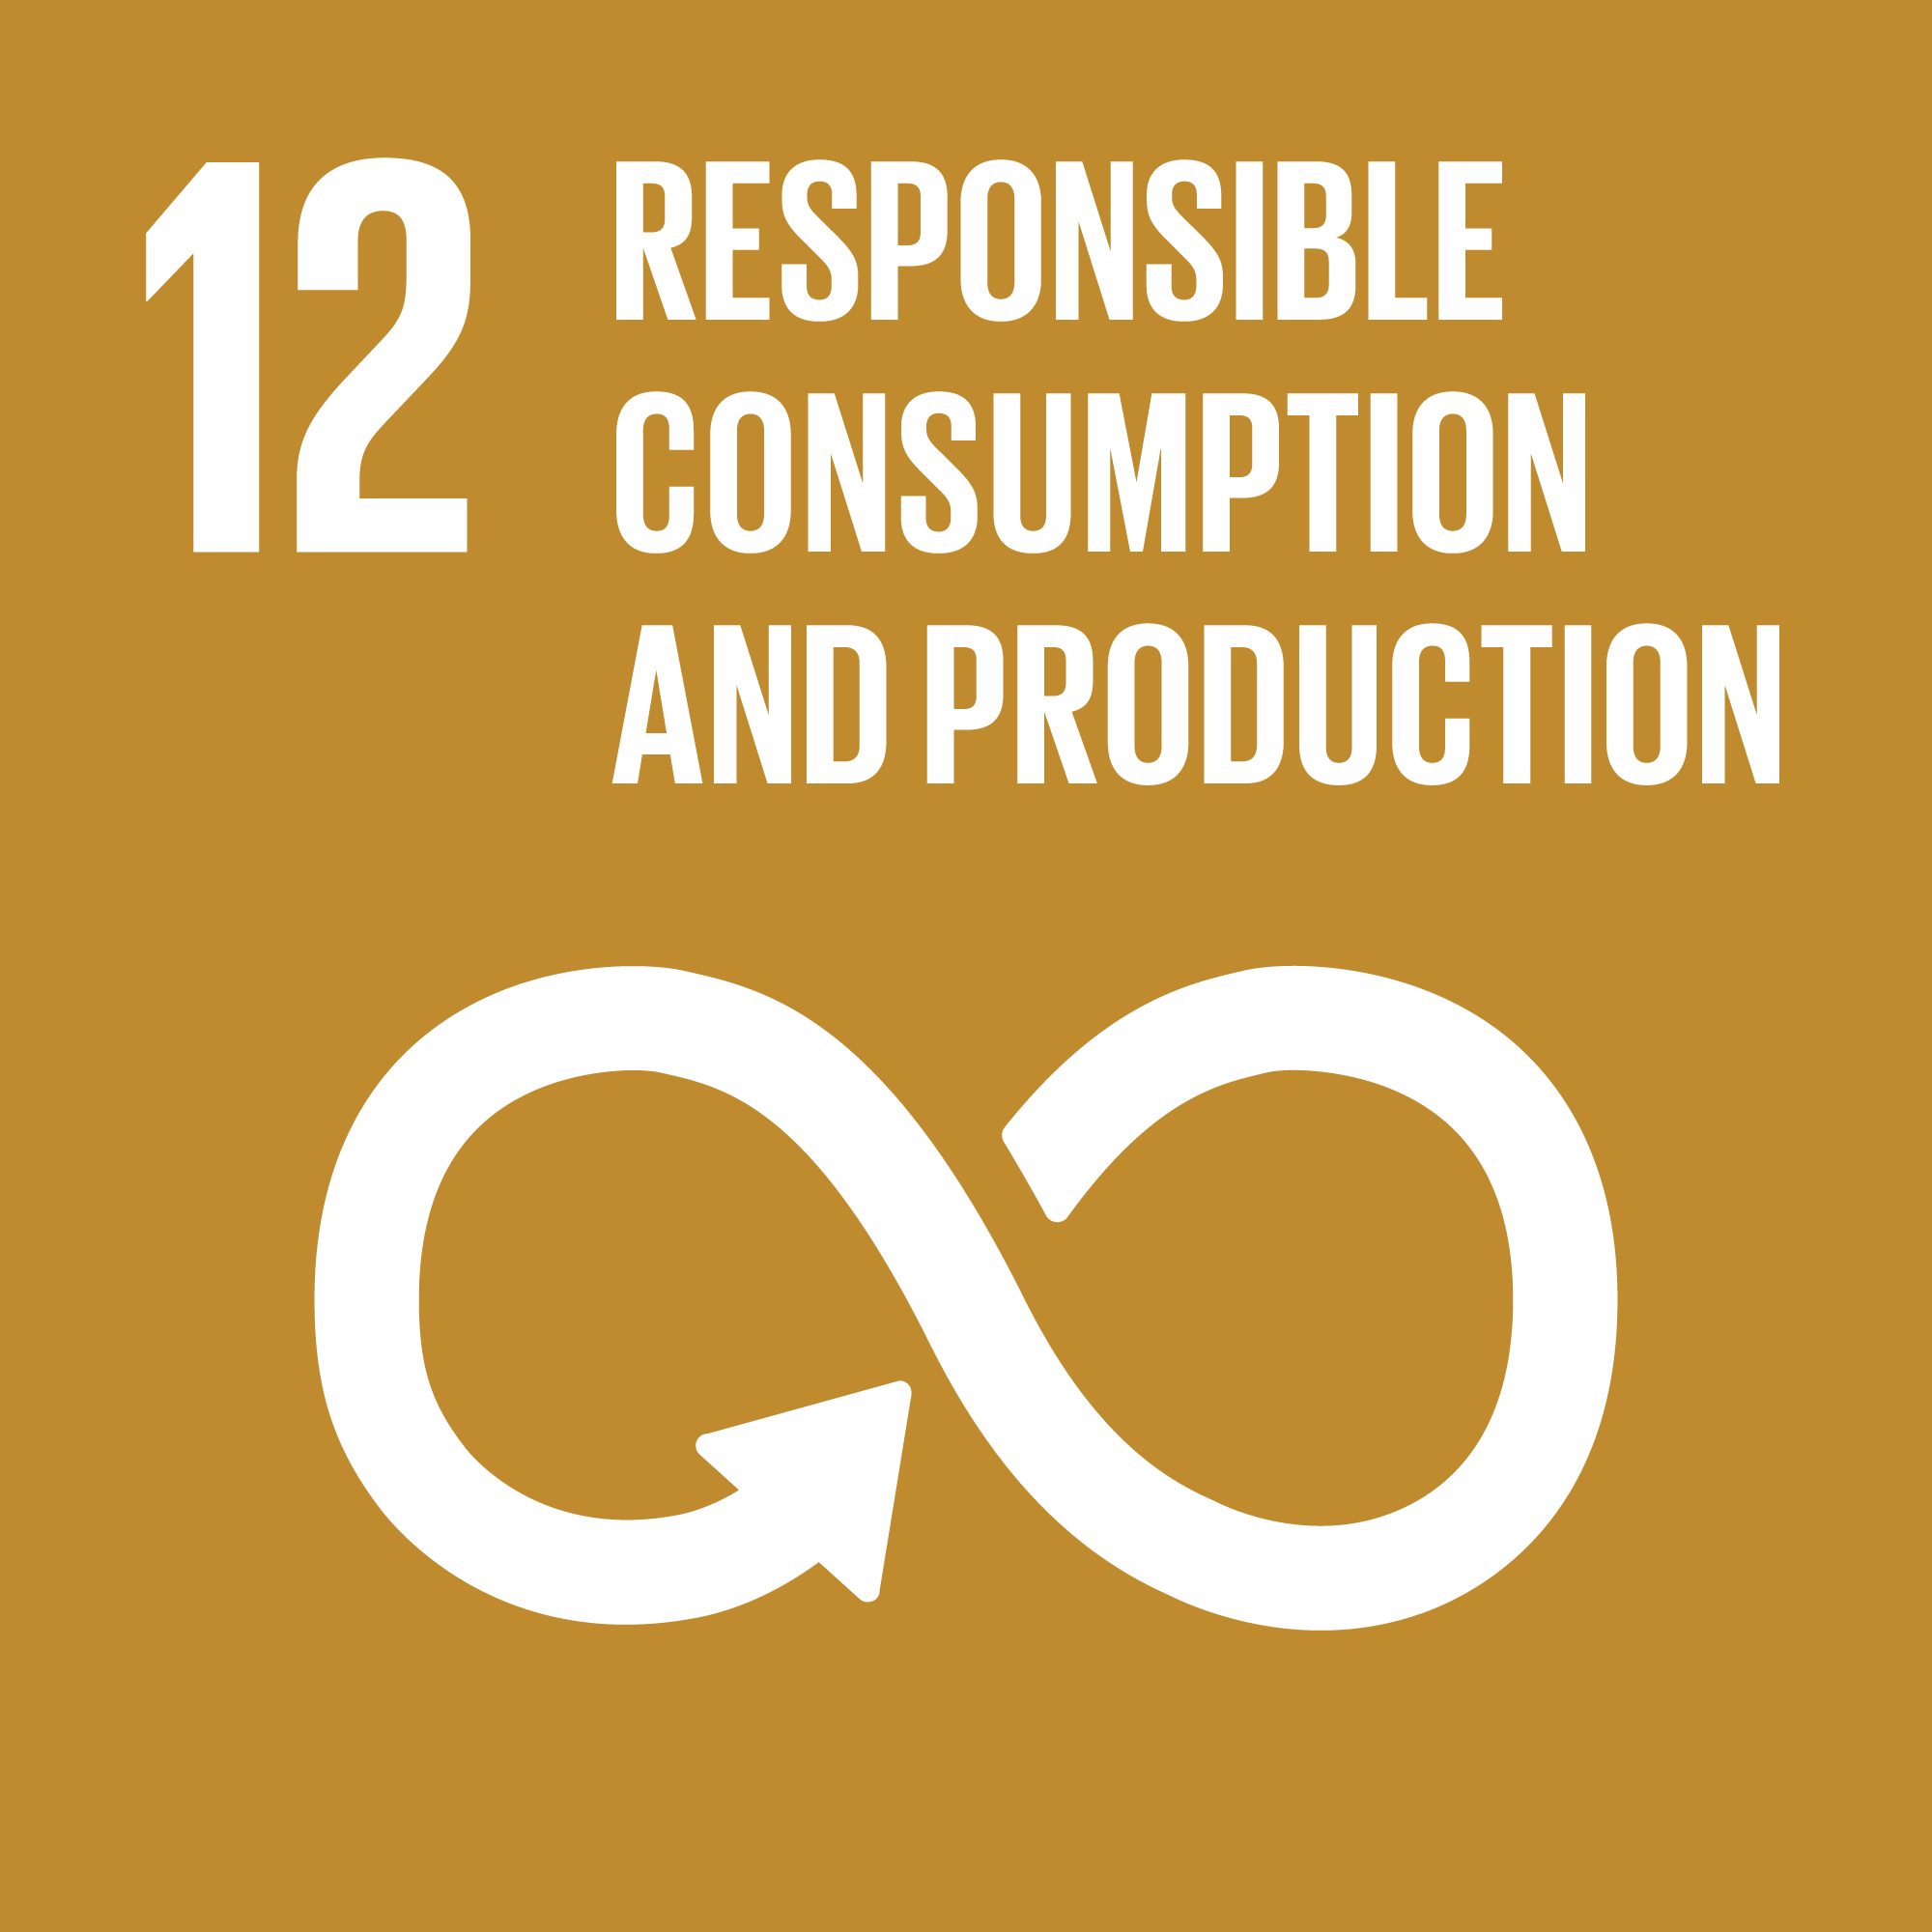 what does responsible consumption and production mean